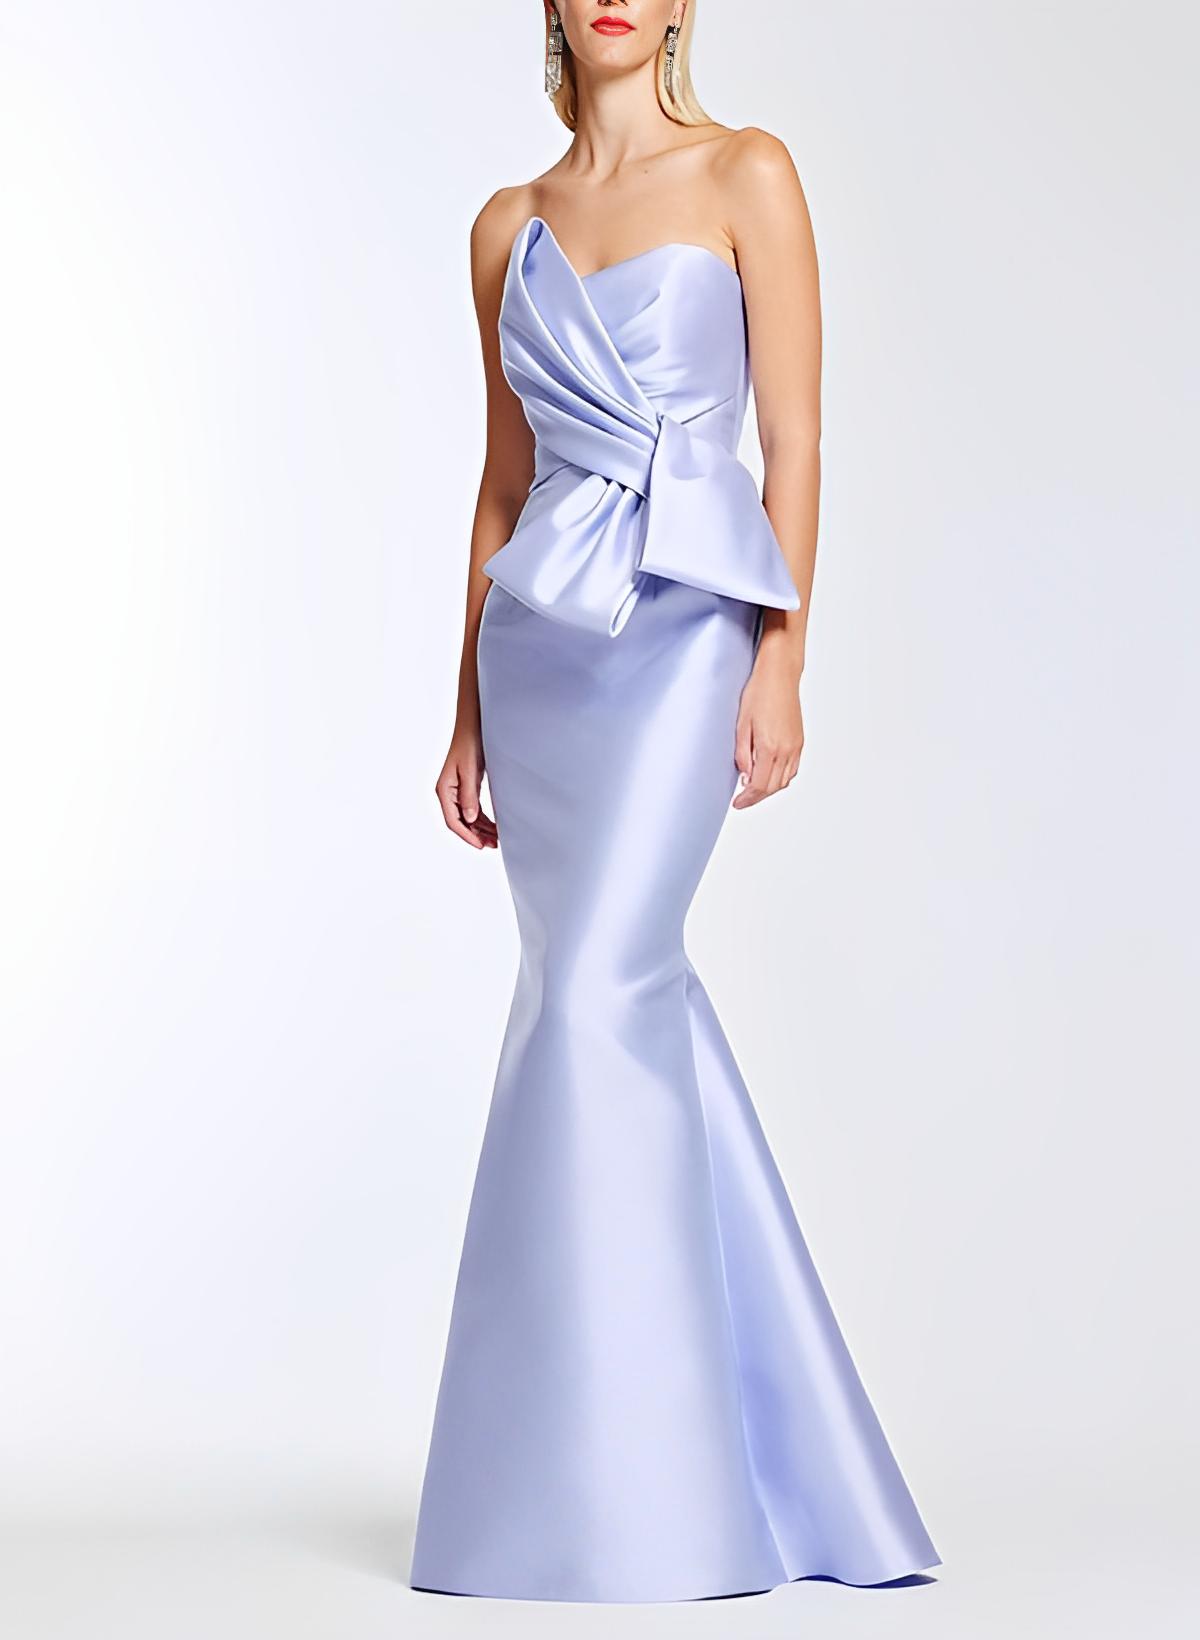 Mermaid Strapless Sleeveless Floor-Length Satin Mother Of The Bride Dresses With Bow(s)